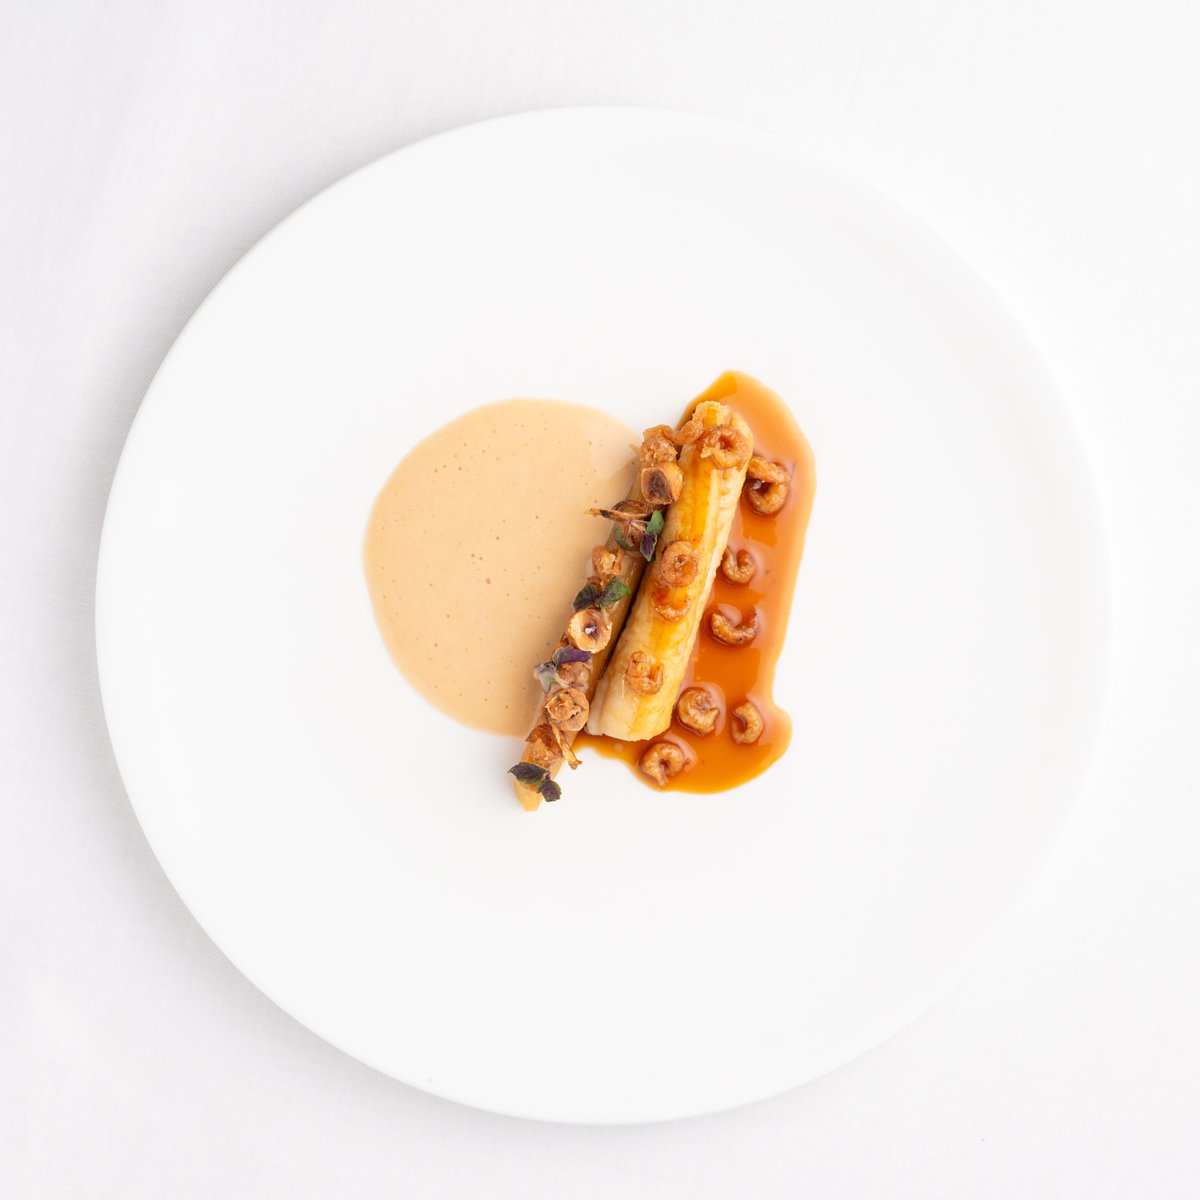 Quite happy with this one- roasted Dover sole, oxidised Chardonnay & brown shrimp Mattelote sauce, glazed salsify, Piedmontese hazelnuts, Soubise of Sunchoke and Tonka bean, brown butter emulsion.

…On the lunch and grand tour menus from next week.